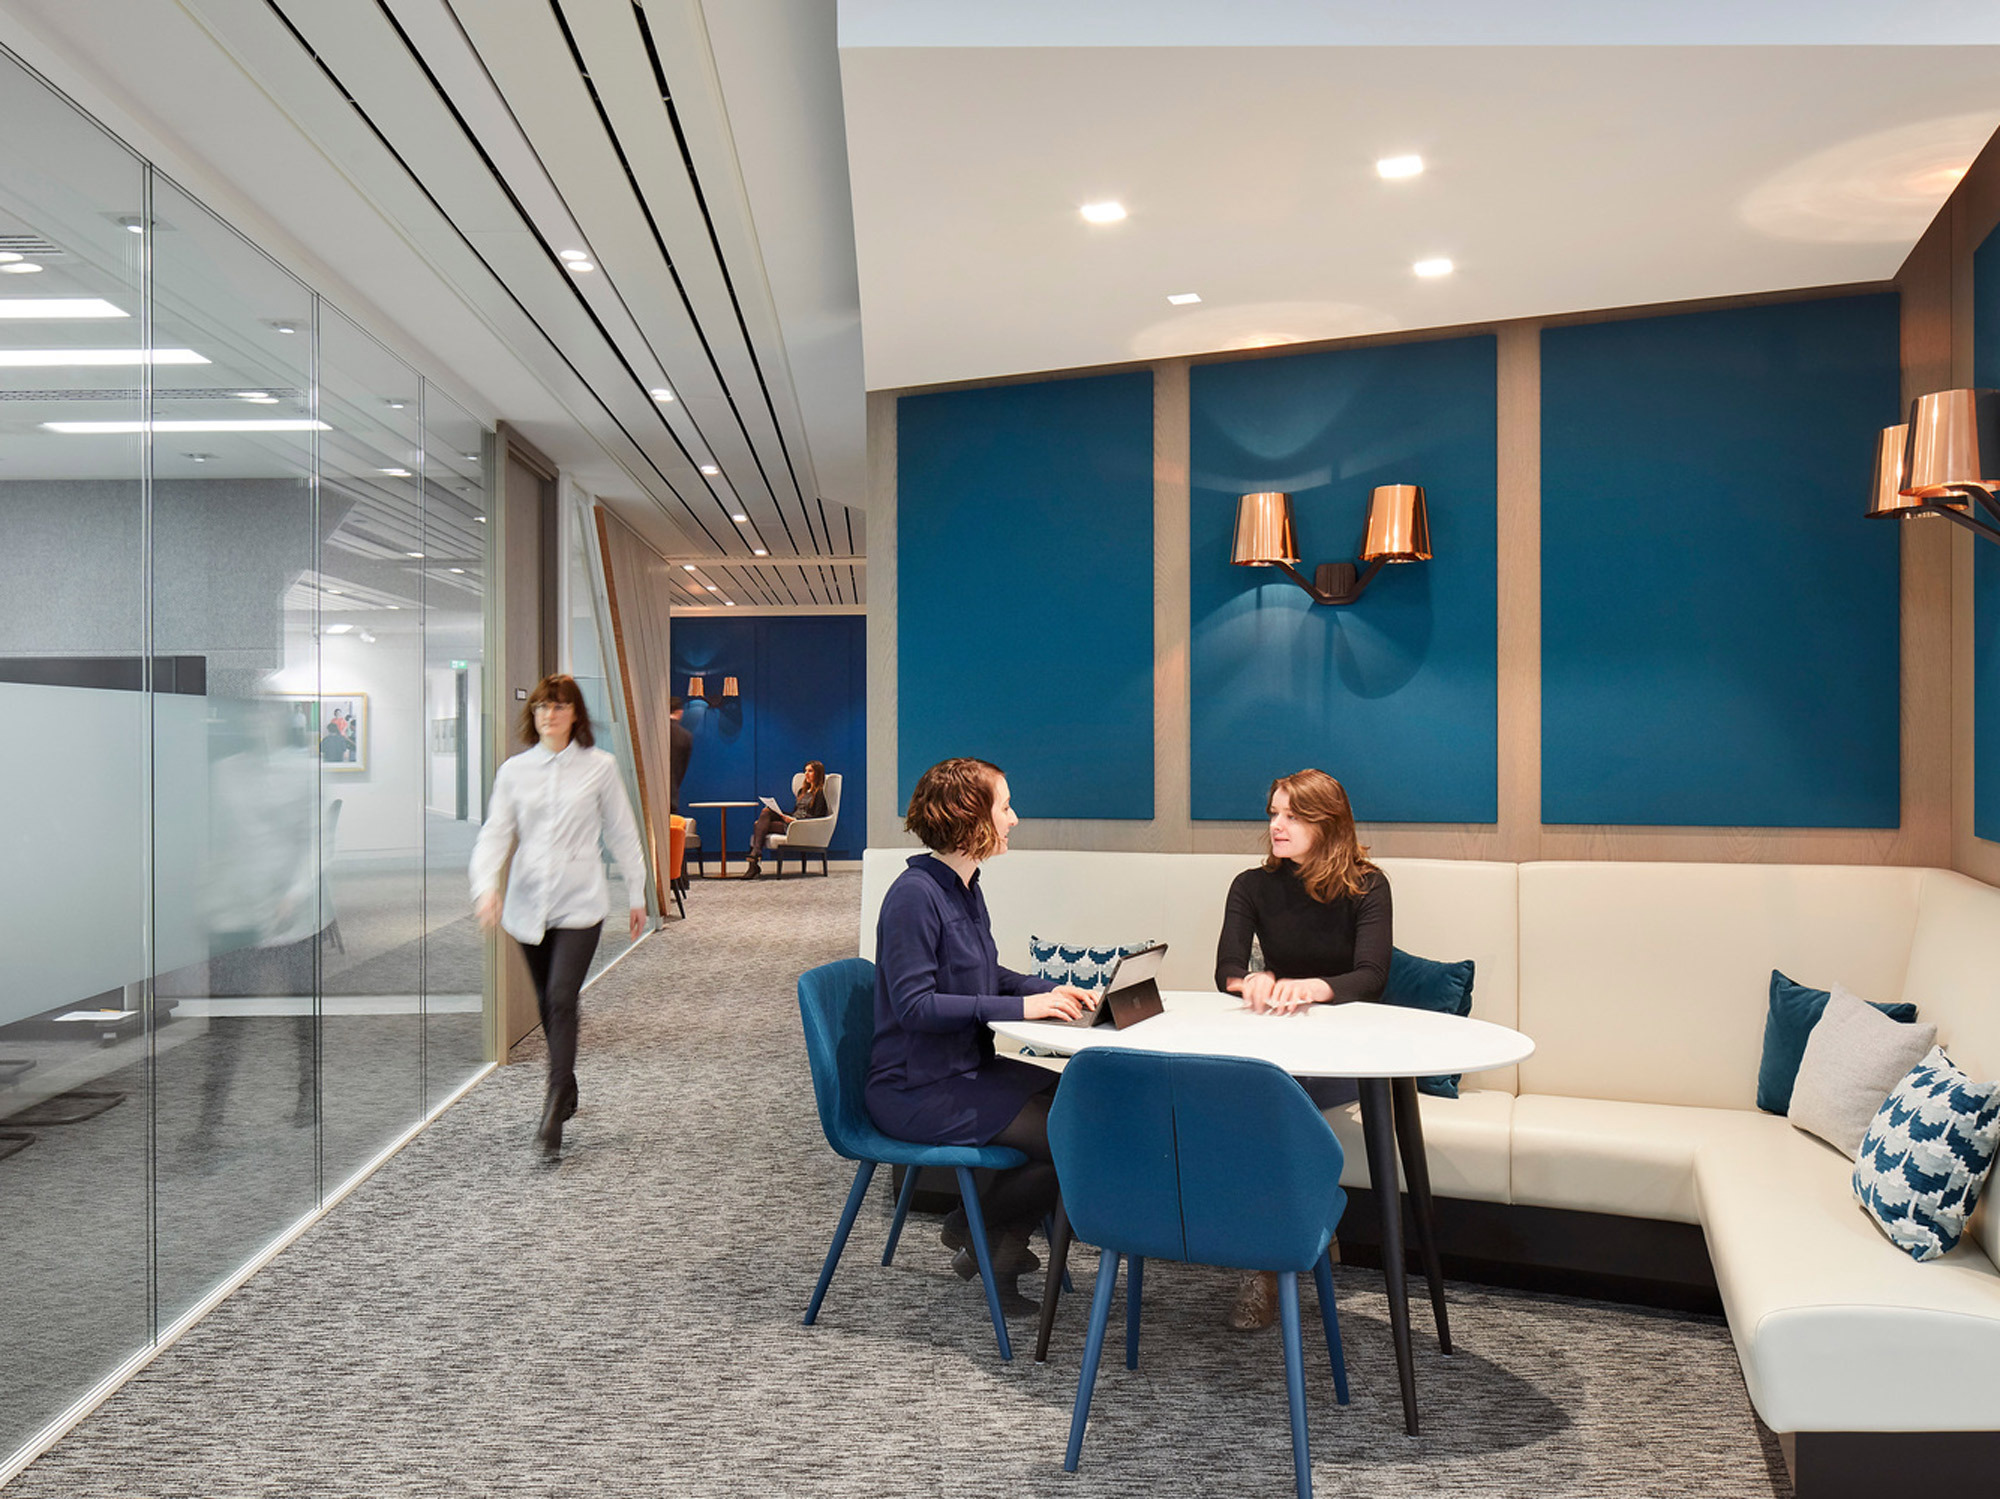 Modern office lounge showing a conversation area with a plush white couch, blue privacy panels, wood accents, and sleek wall-mounted sconces providing warm ambient lighting. A person strides through the hallway beyond the cozy seating arrangement.